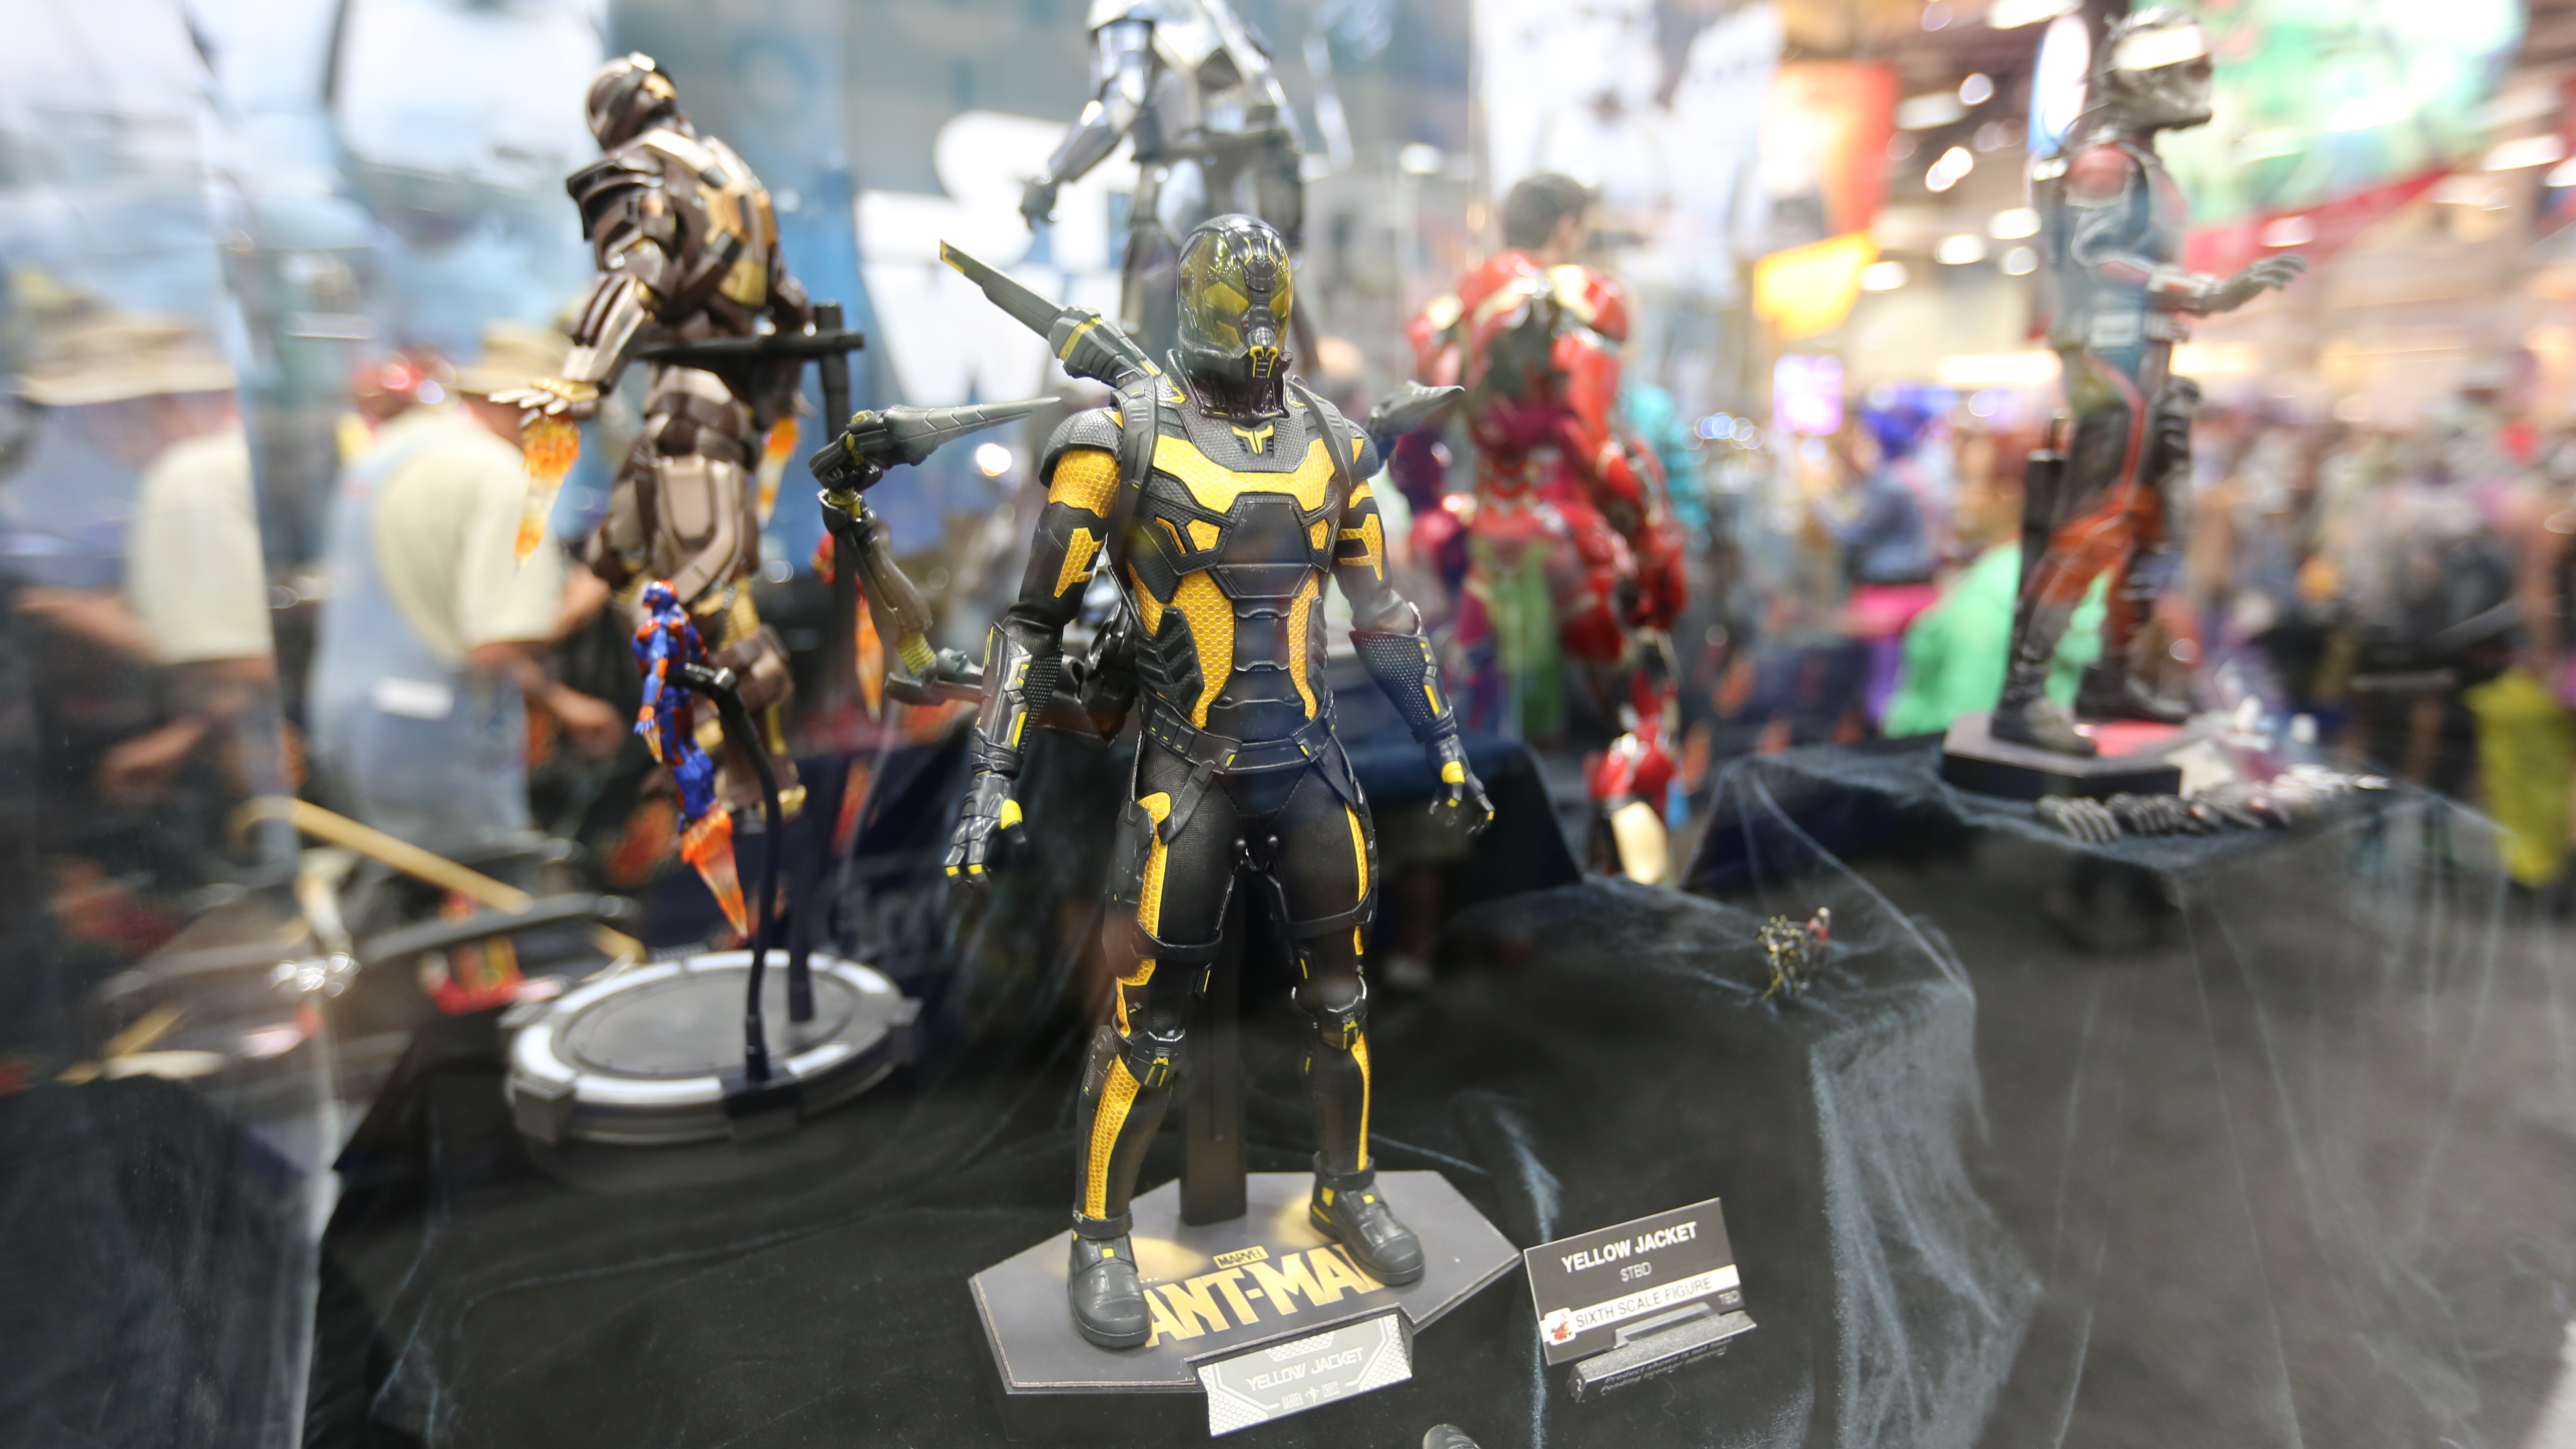 ant-man-hot-toys-sideshow-collectibles-booth-picture-comic-con-2.jpg